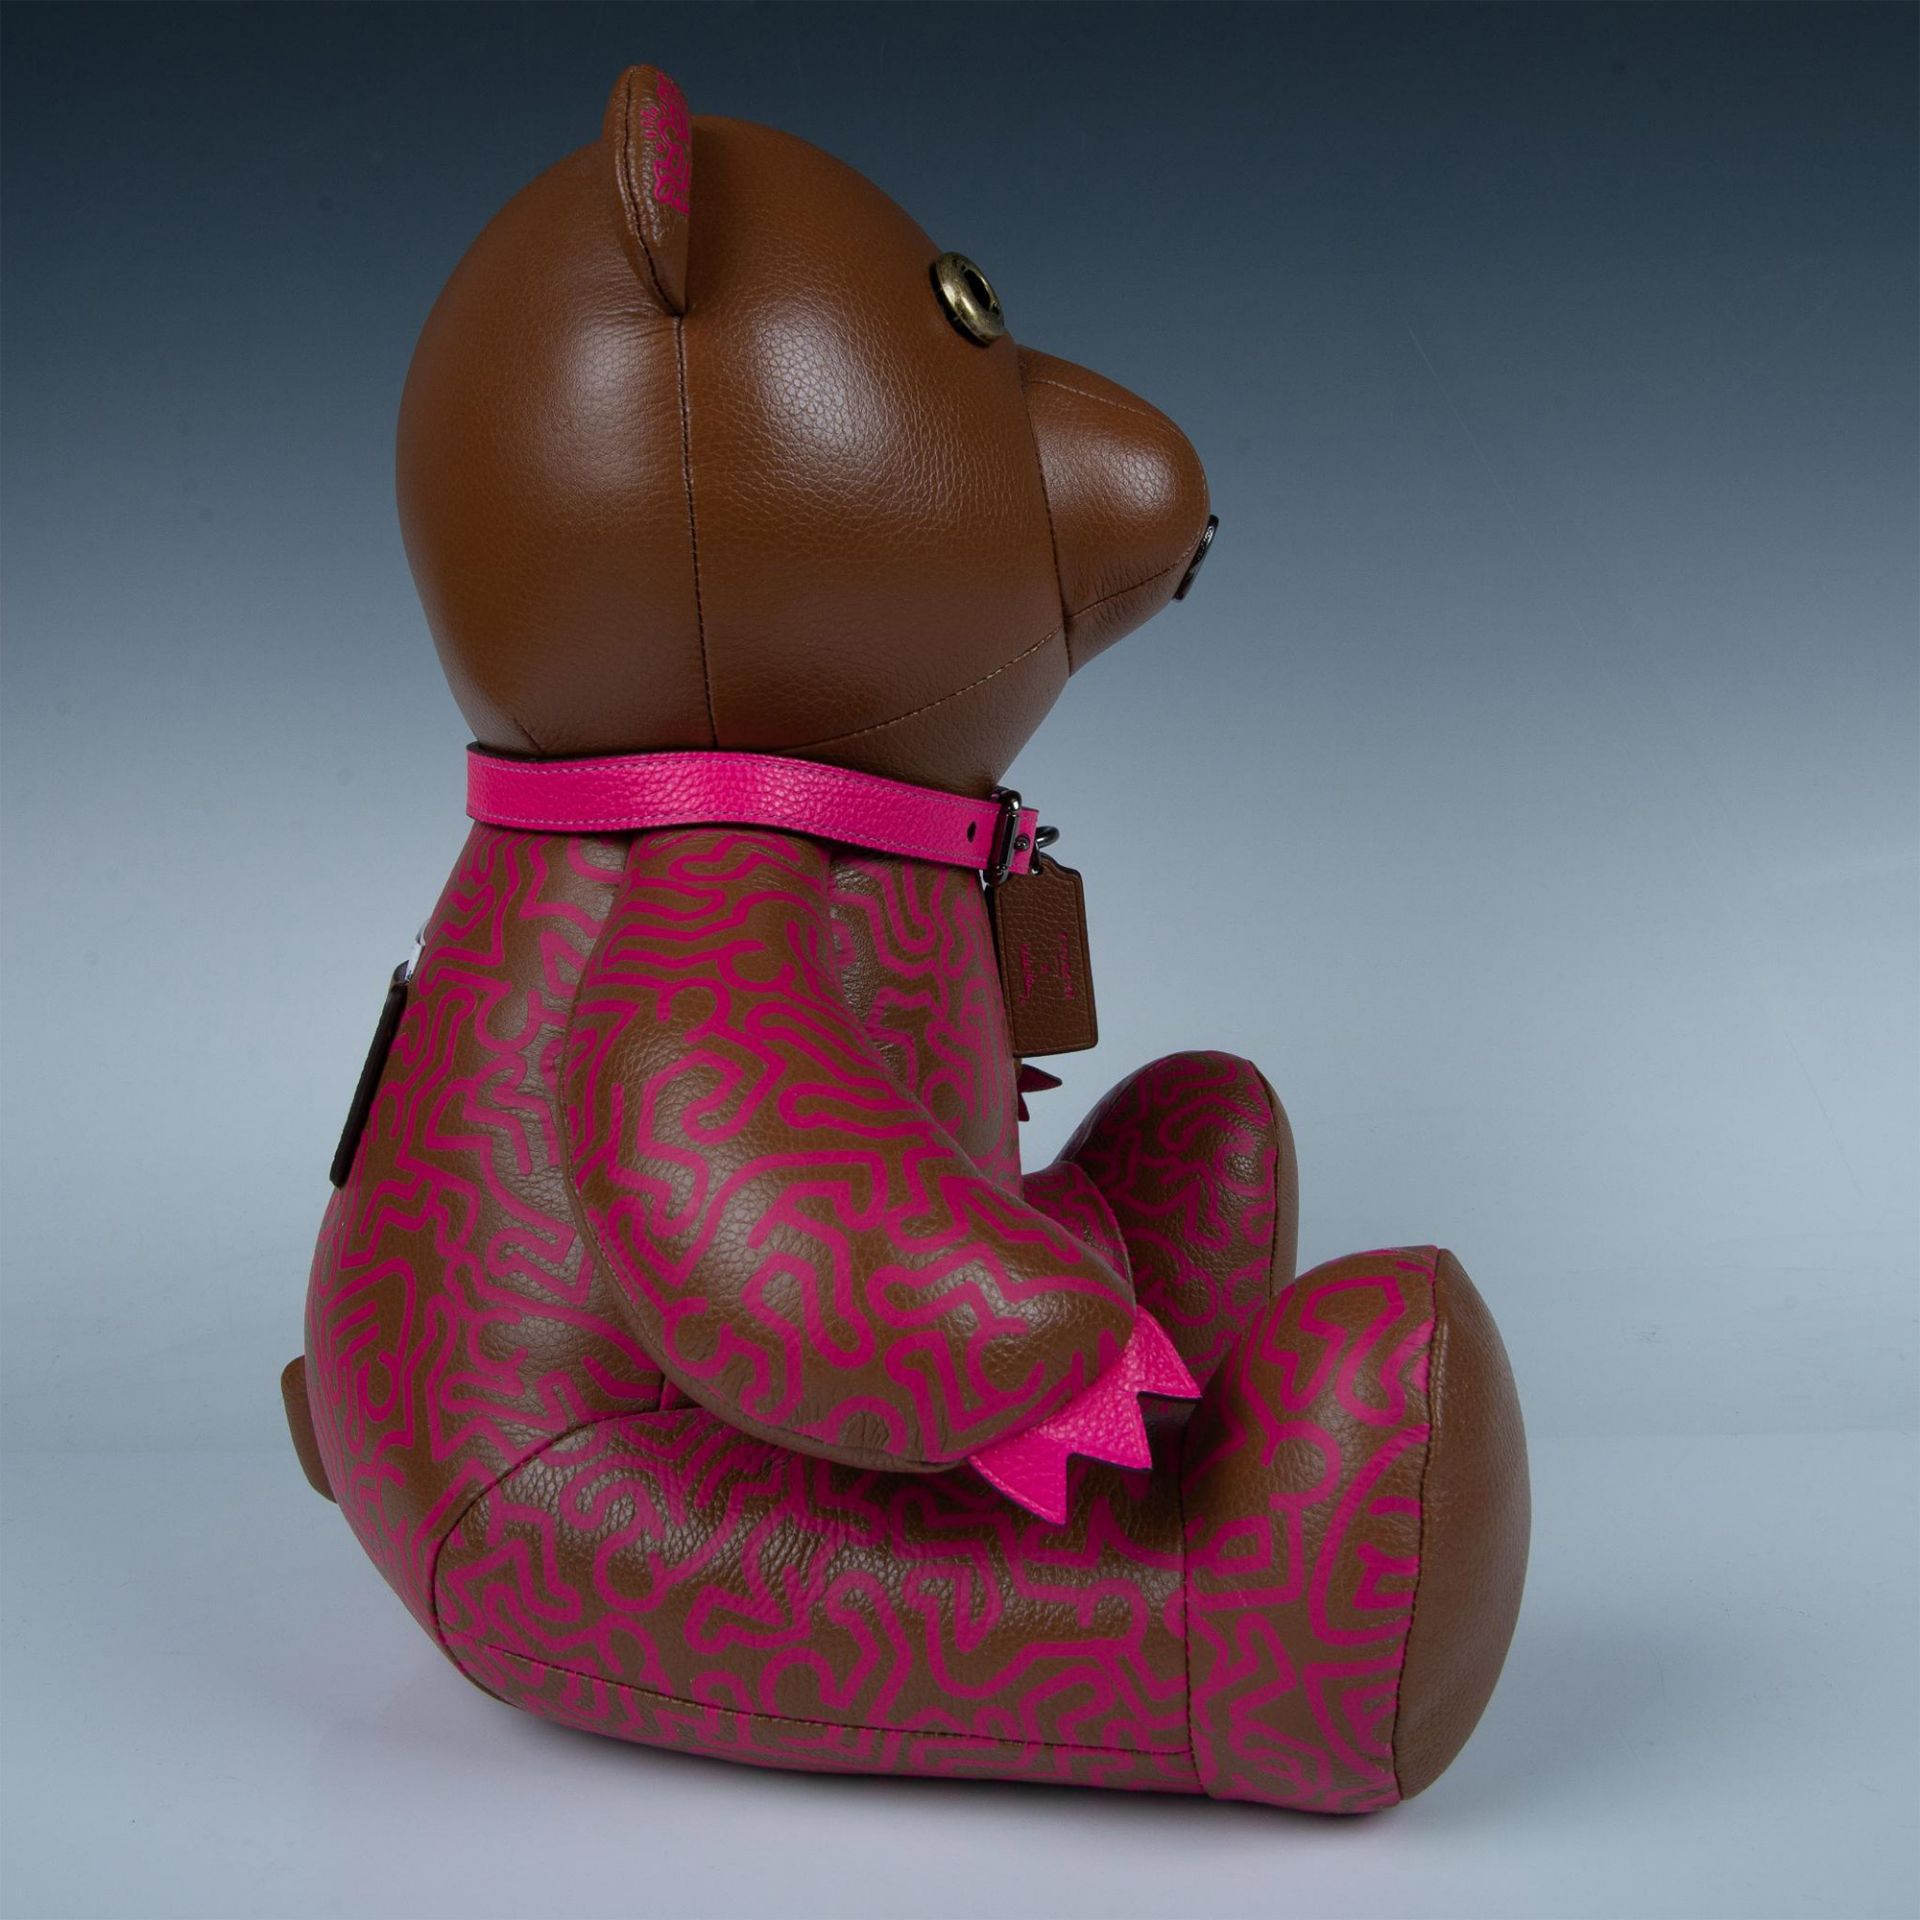 Coach Keith Haring Collaboration Plush Leather Teddy Bear - Image 6 of 7